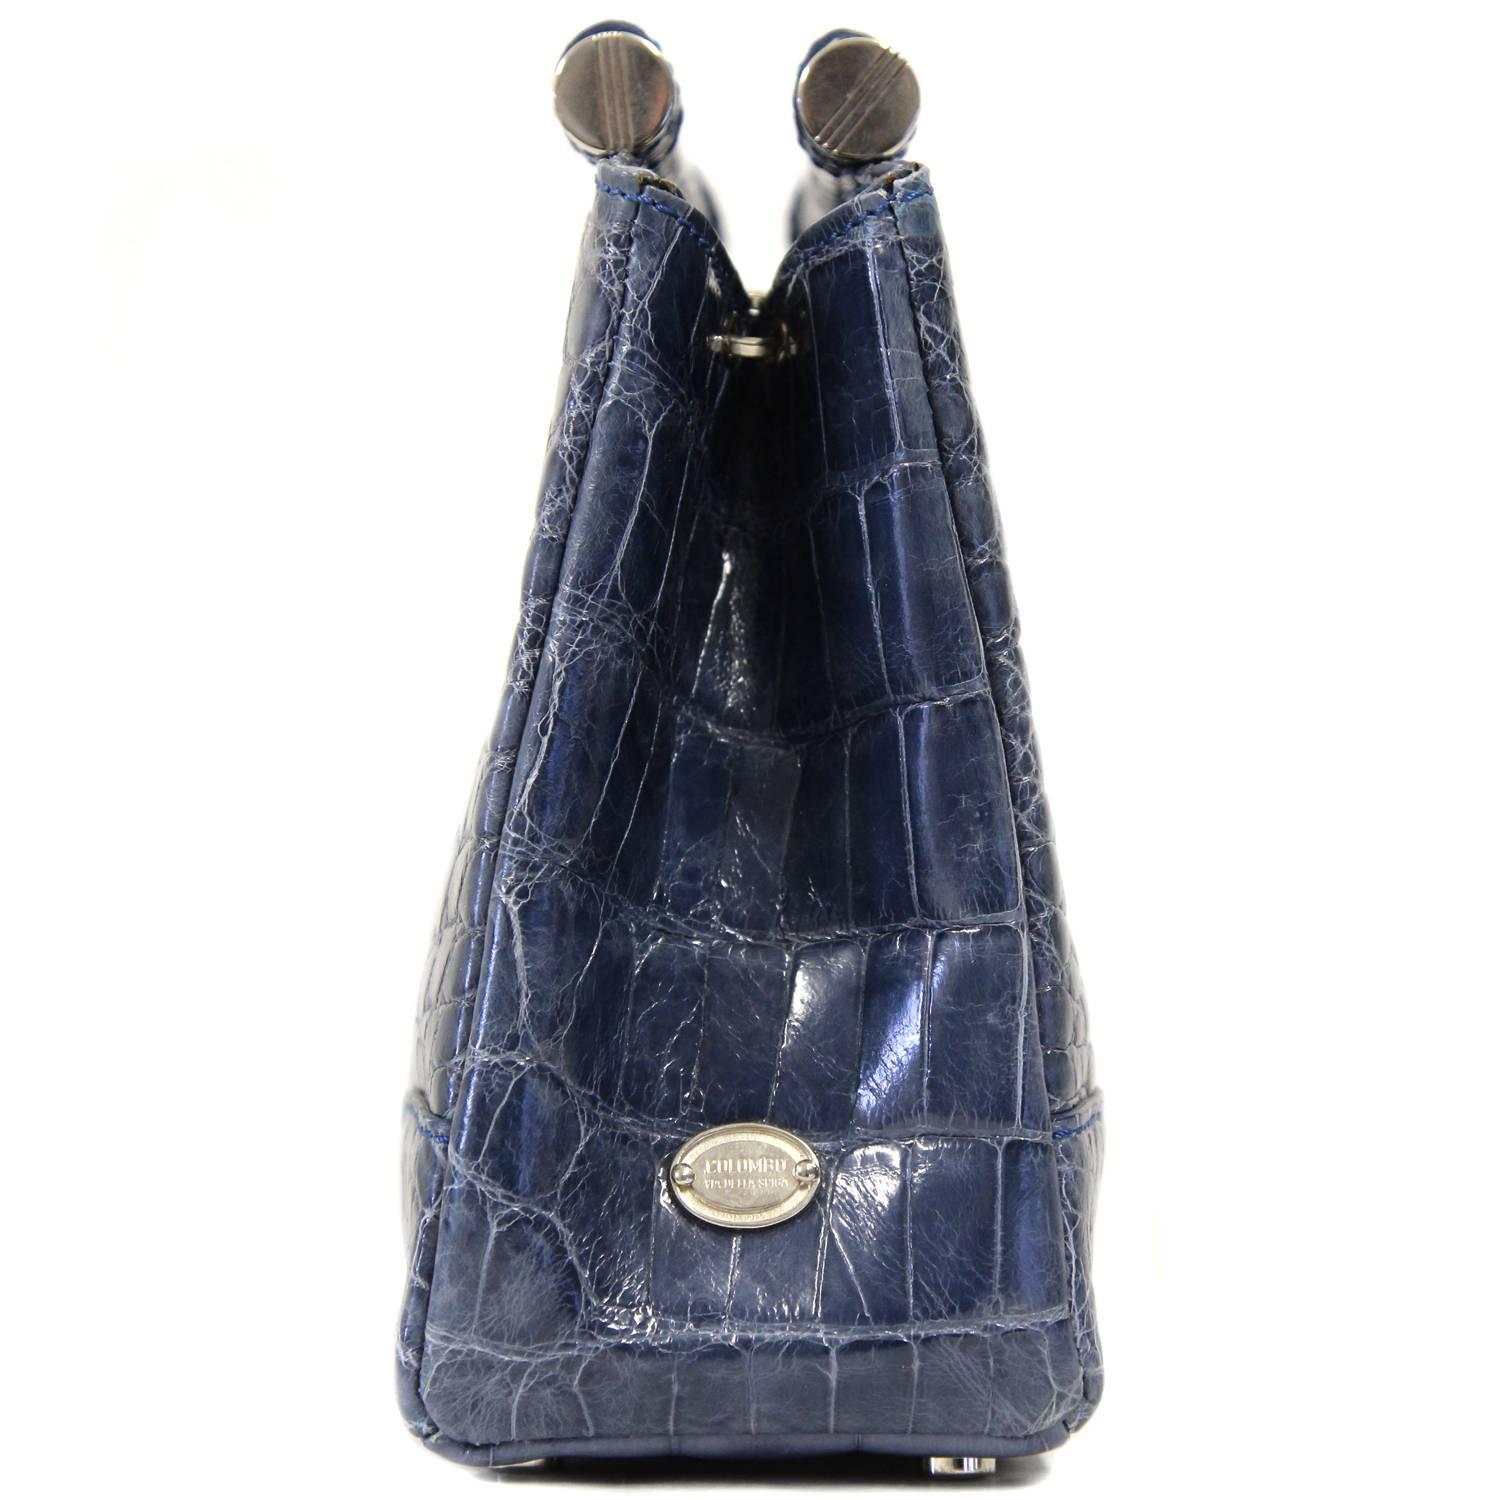 Pretty crocodile leather handbag in blue-gray color made by Colombo Via della Spiga with silver hardware. The bag features two coated iron handles, a press-button closure and an internal zipped pocket. Lined in suede. The item comes with a short